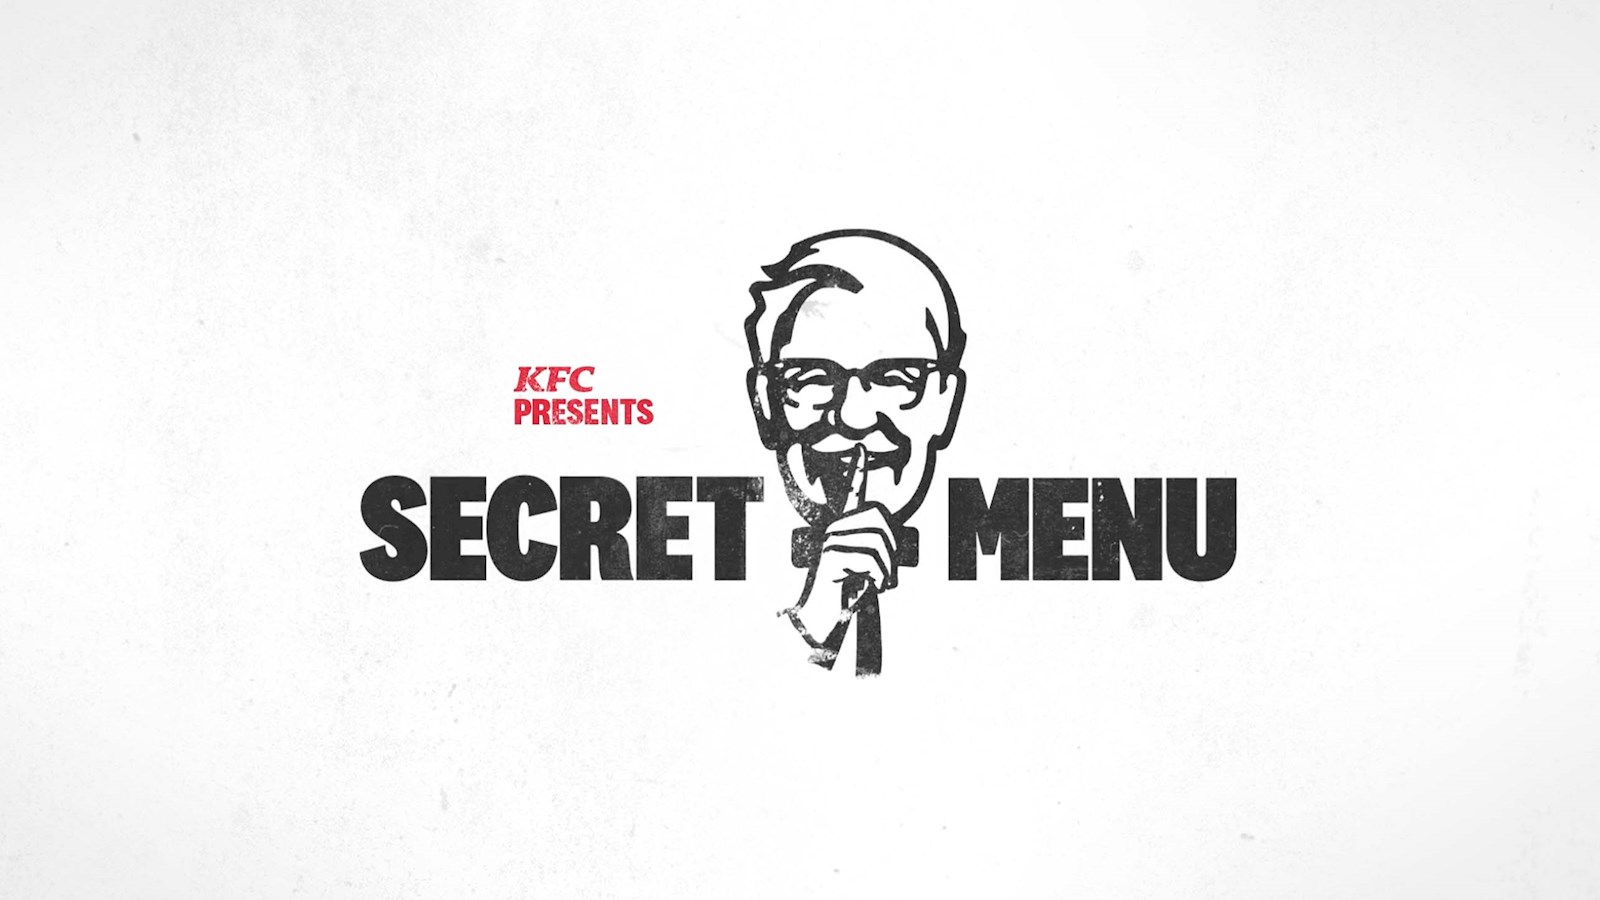 A black and white graphic of KFC Colonel Sanders shushing and the text 'KFC Secret Menu' 